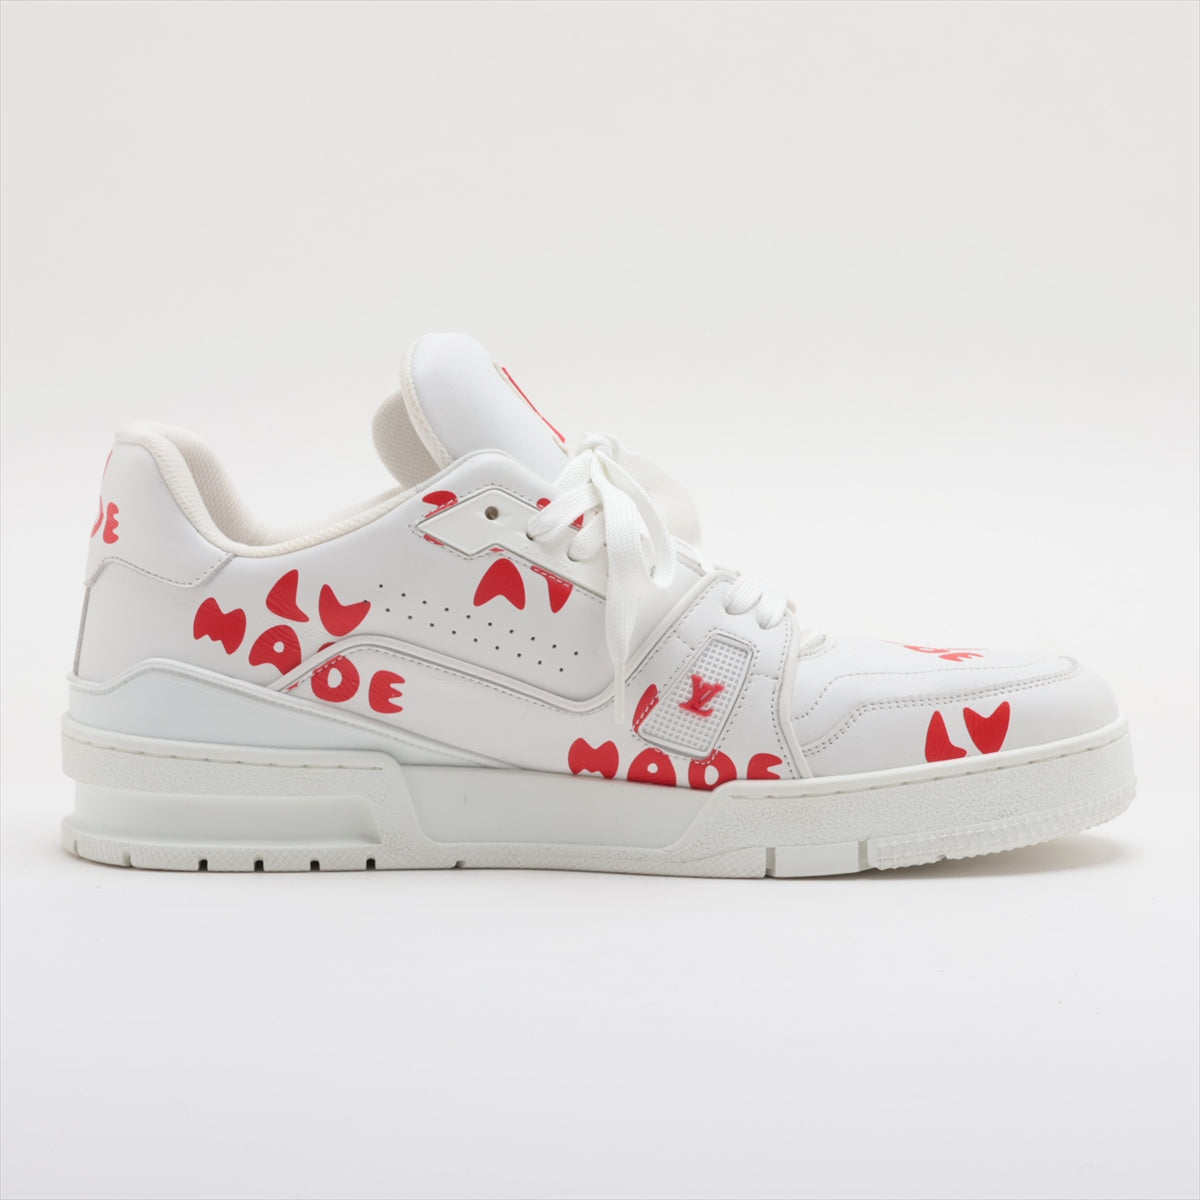 Louis Vuitton x Nigo LV Trainer Line 21 years Leather Sneakers UK8 1/2 Men's Red x white FD0291